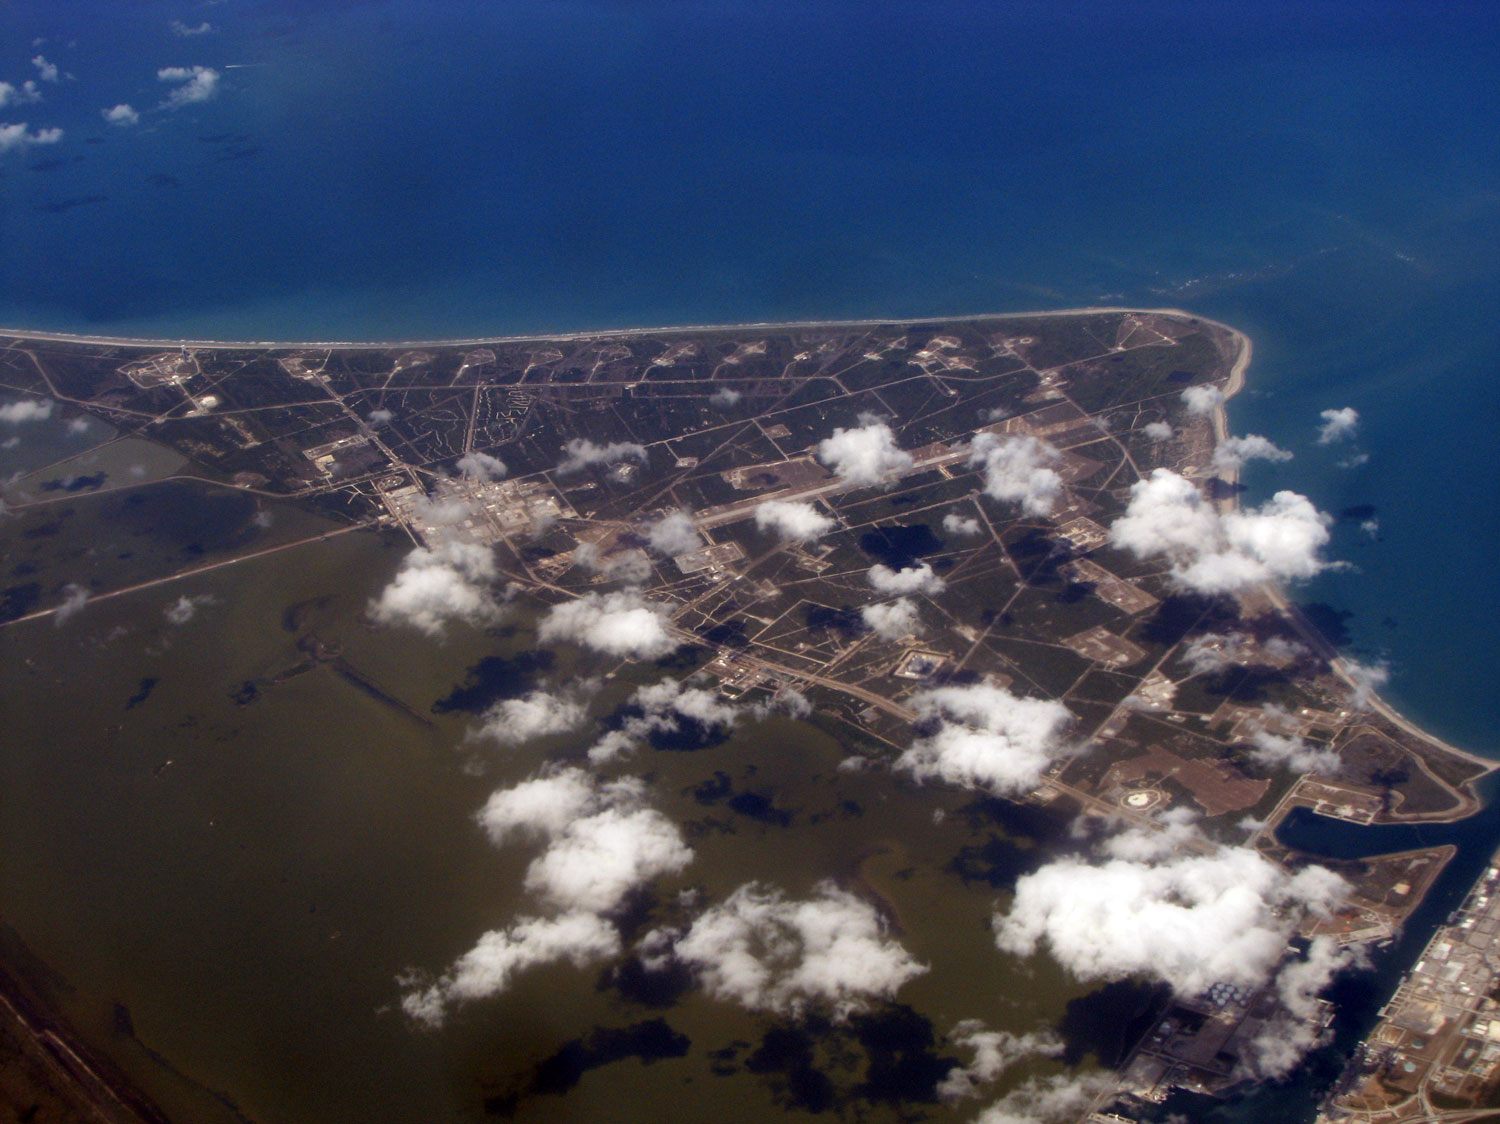 Another view of Cape Canaveral